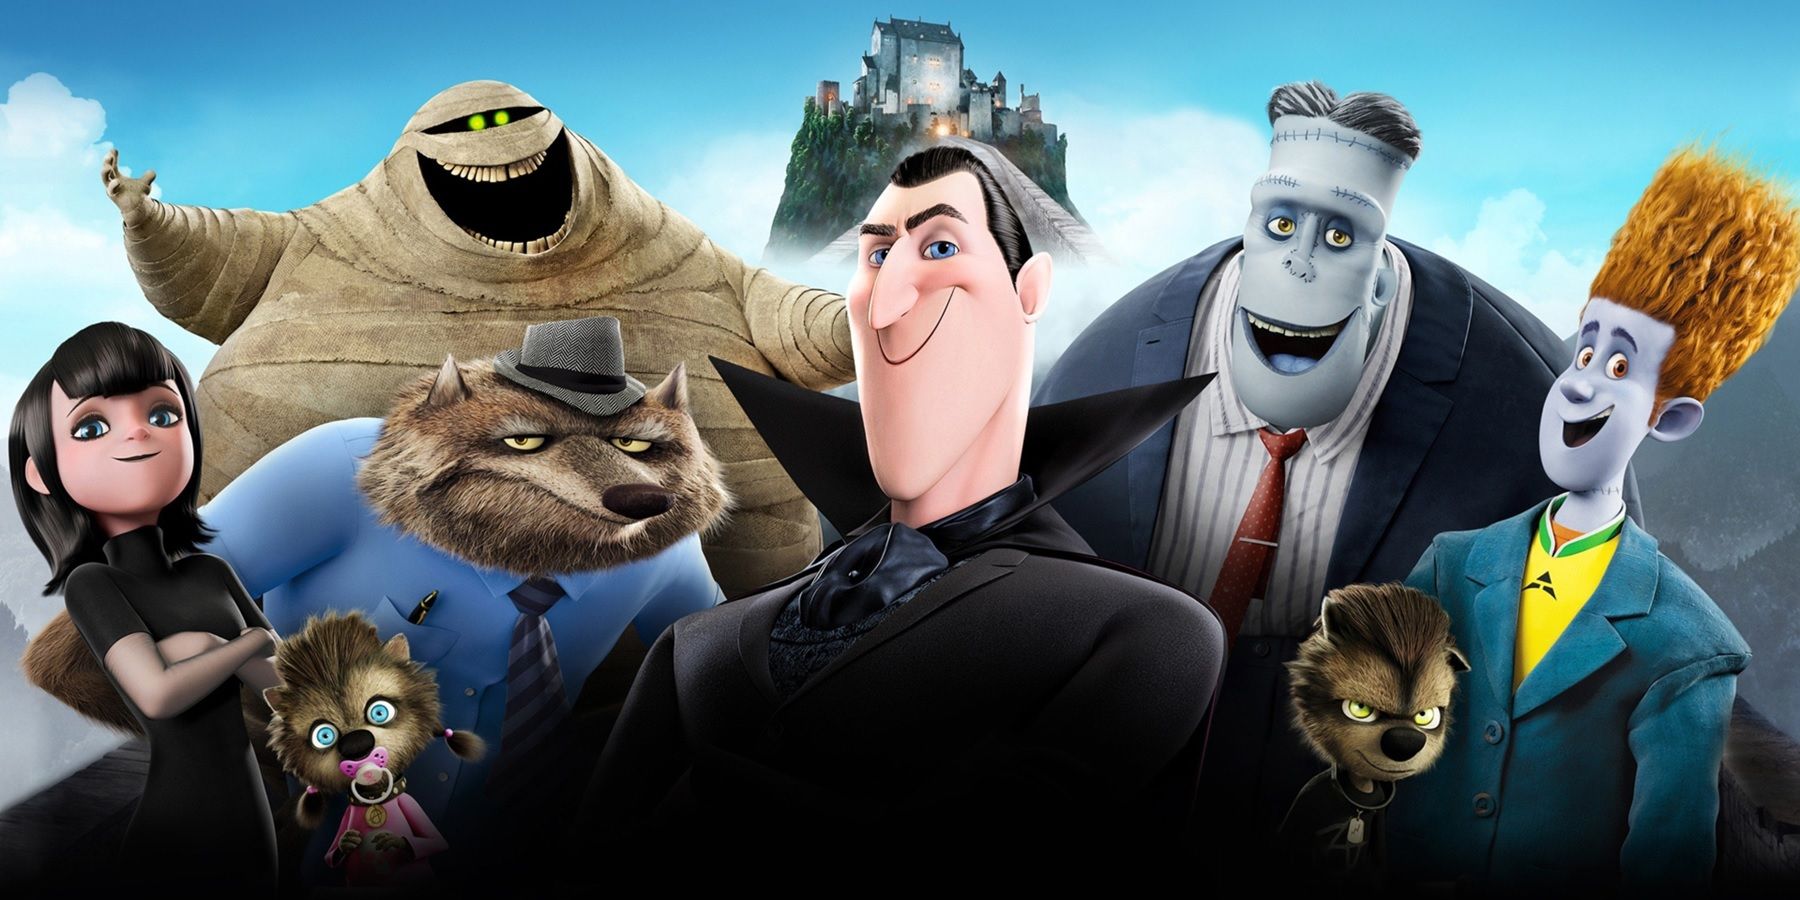 The characters of Hotel Transylvania